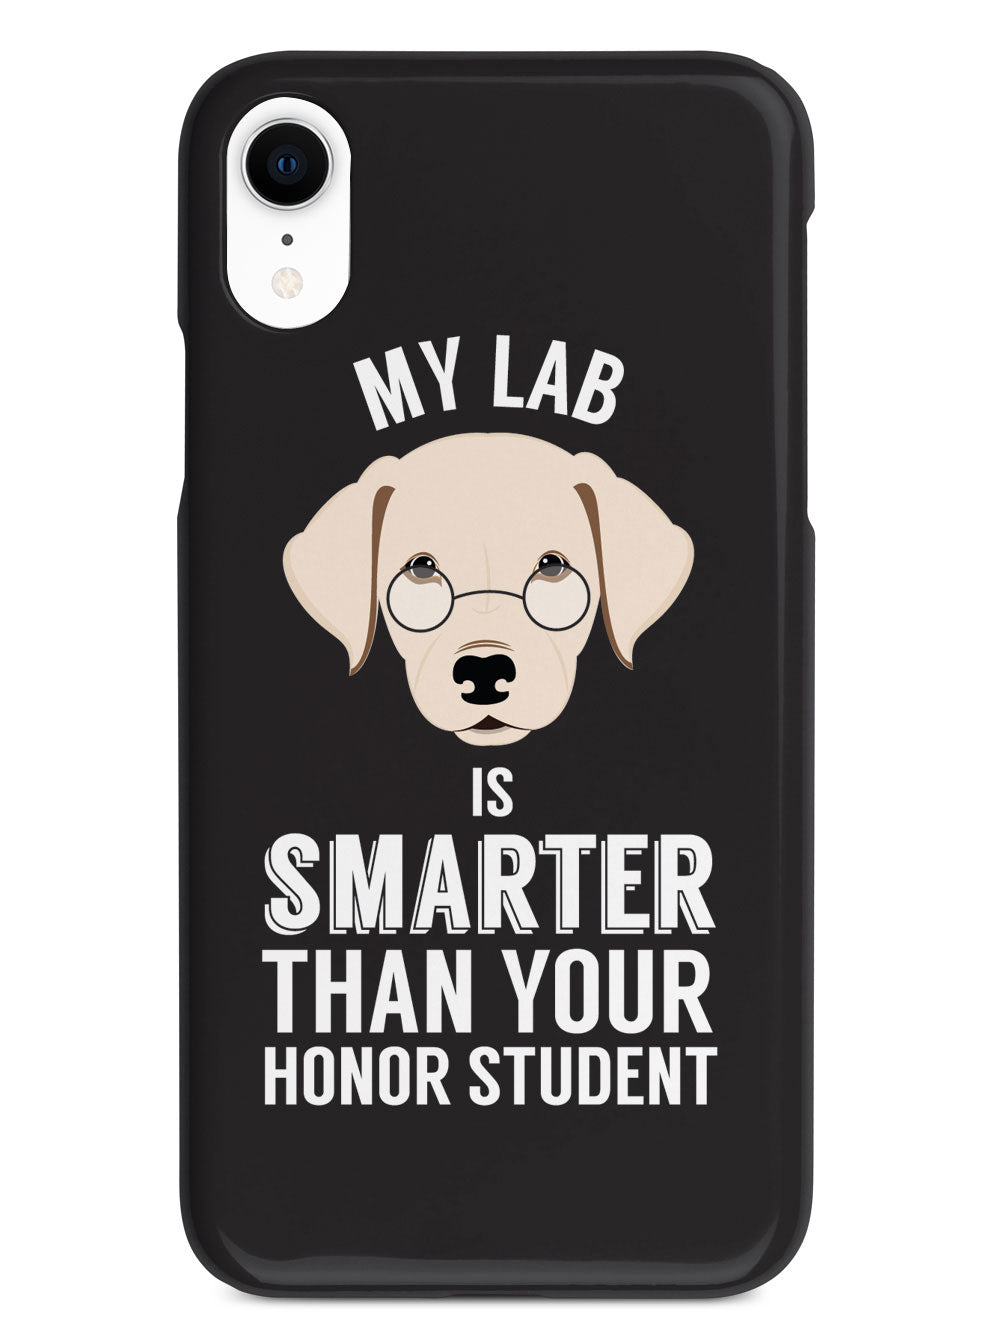 Smarter Than Your Honor Student - Lab Case